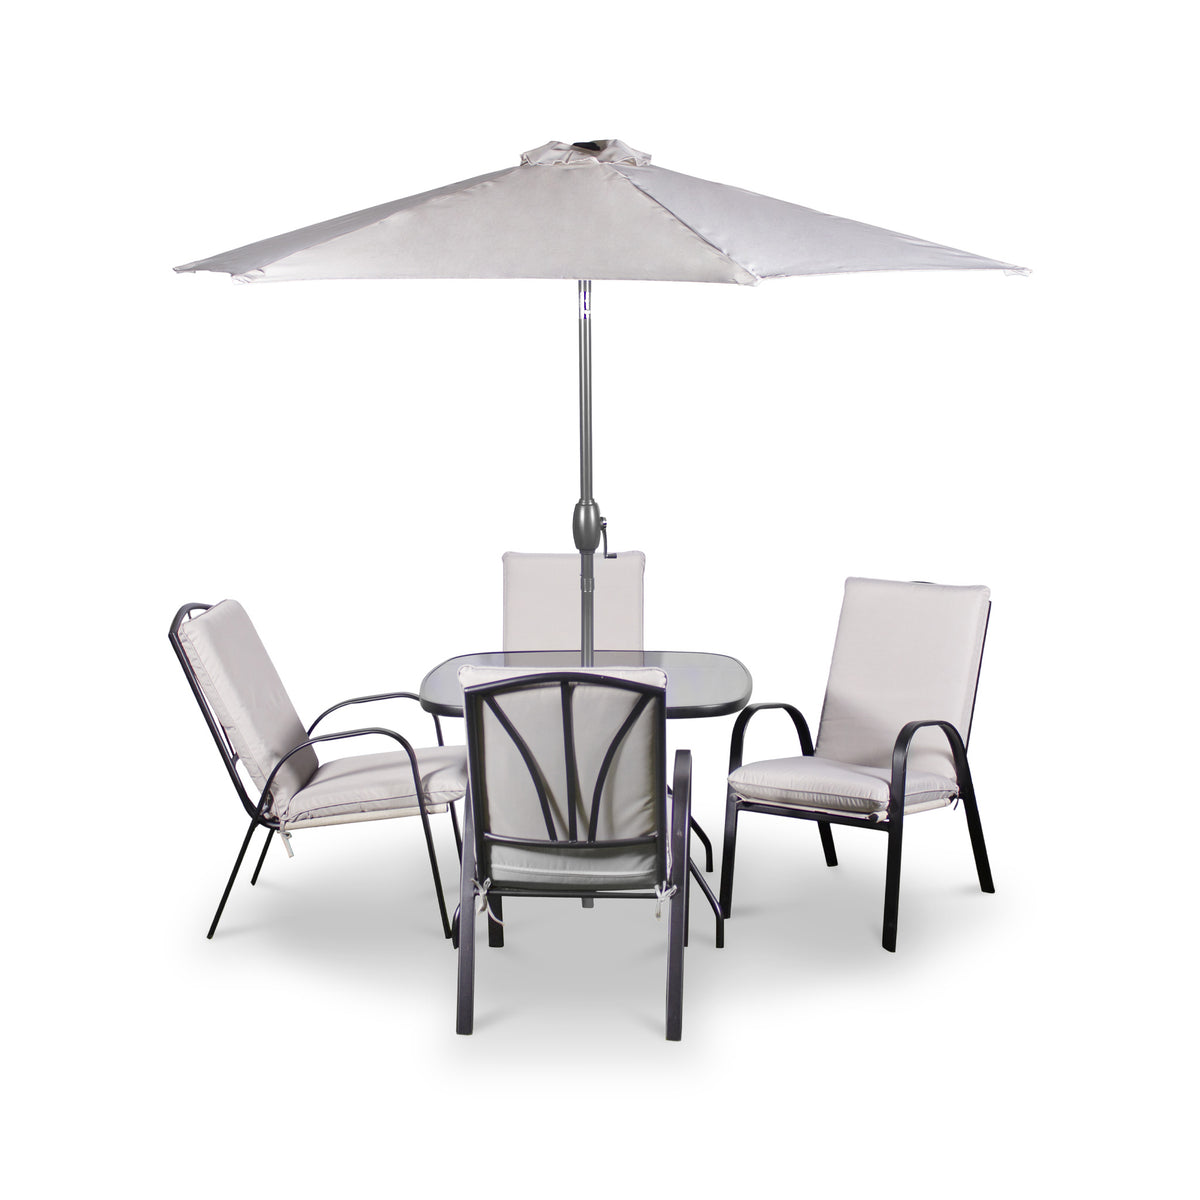 Amalfi 4 Seater Dining Set with Ivory Padded Cushions from Roseland